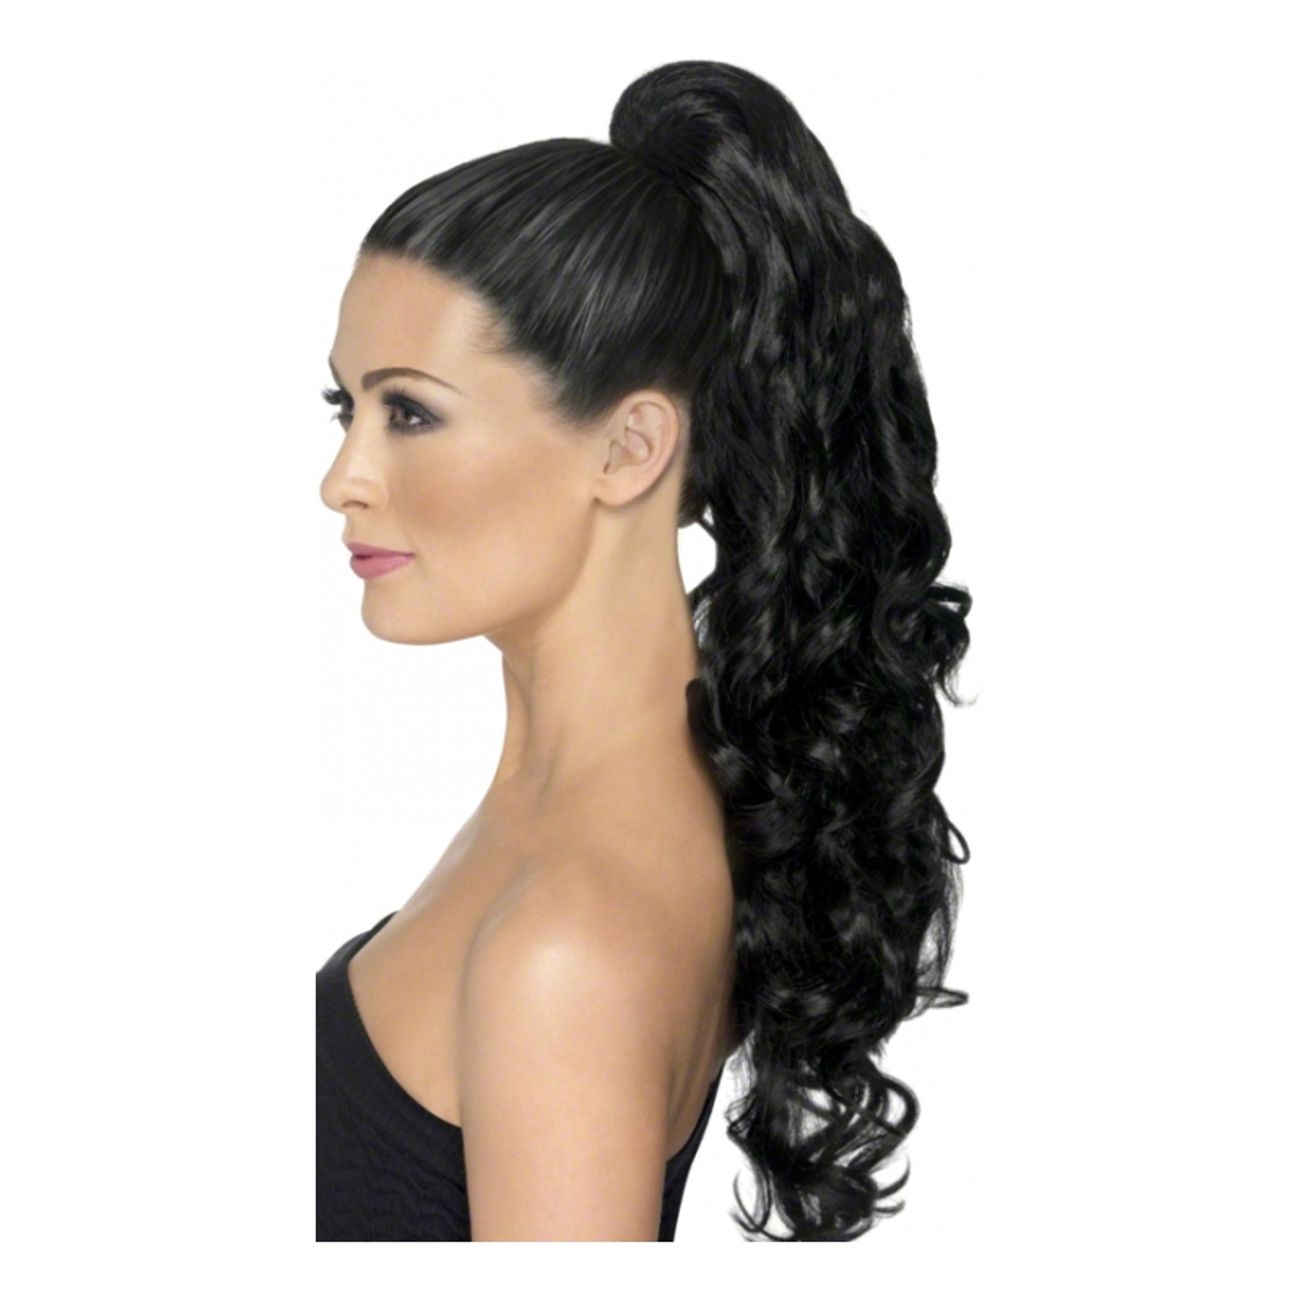 clip-on-ponytail-curly-black-1